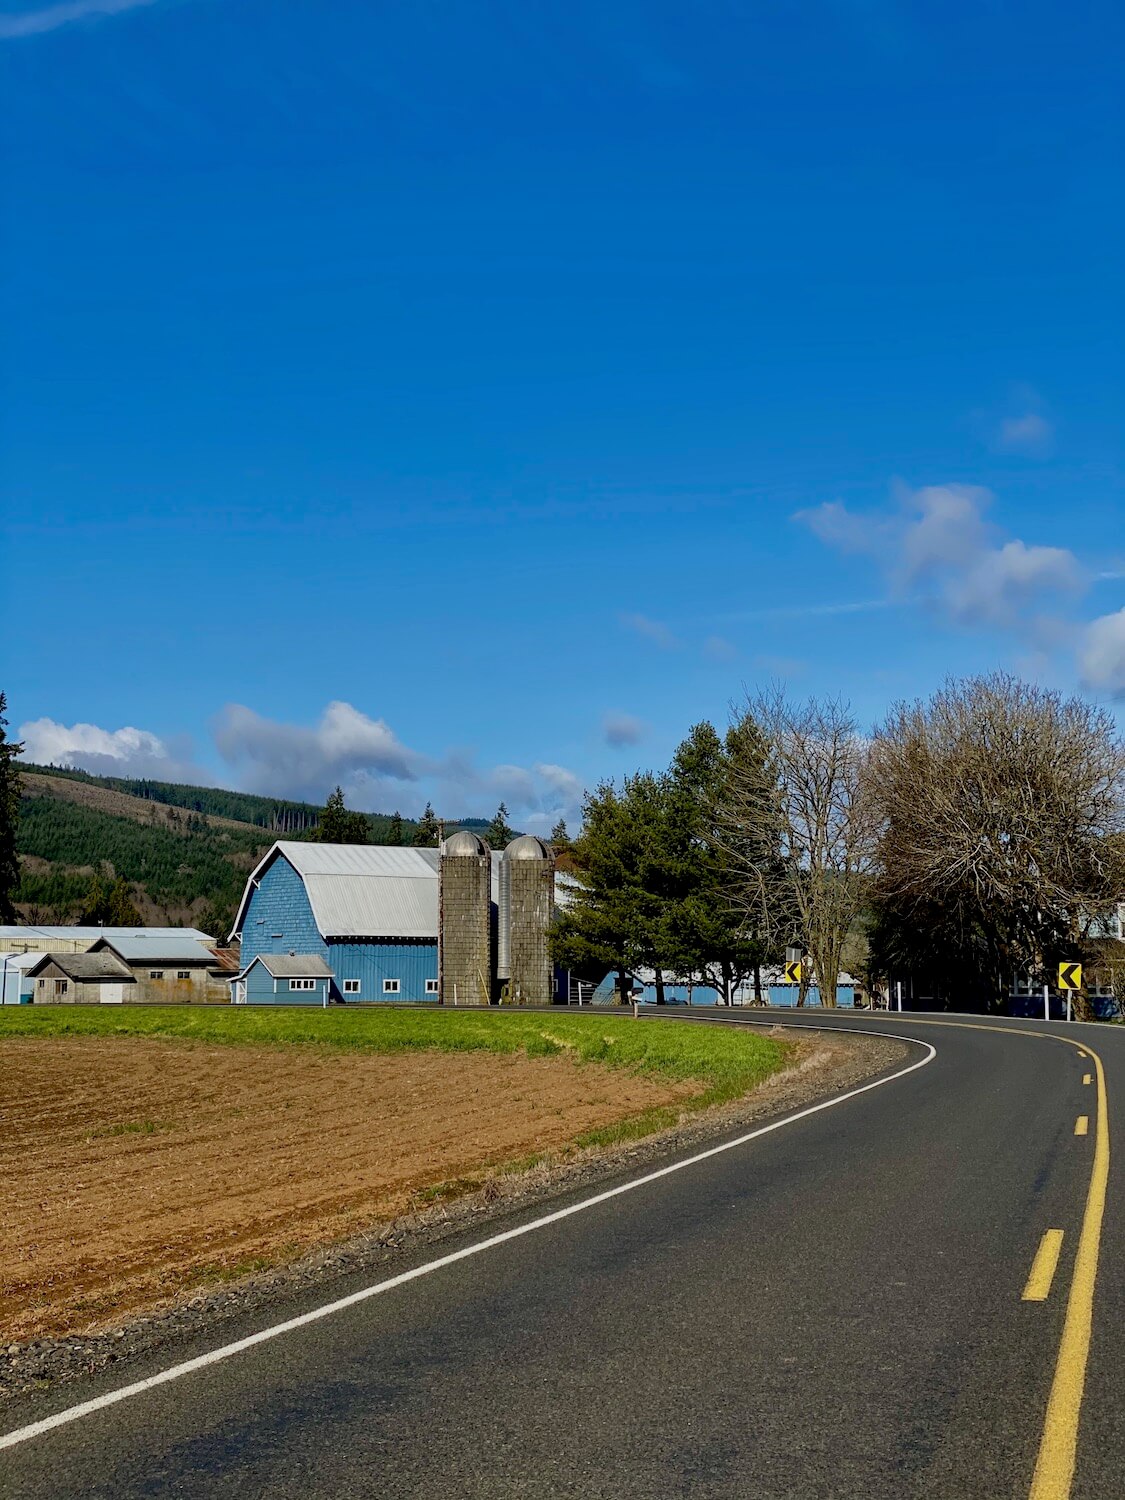 A roadway turns just before a blue dairy barn next to two tall and narrow grain silos. There are trees around the farm and the blue sky above has a few white puffy clouds. The field across the road from the barn is newly plowed brown dirt.